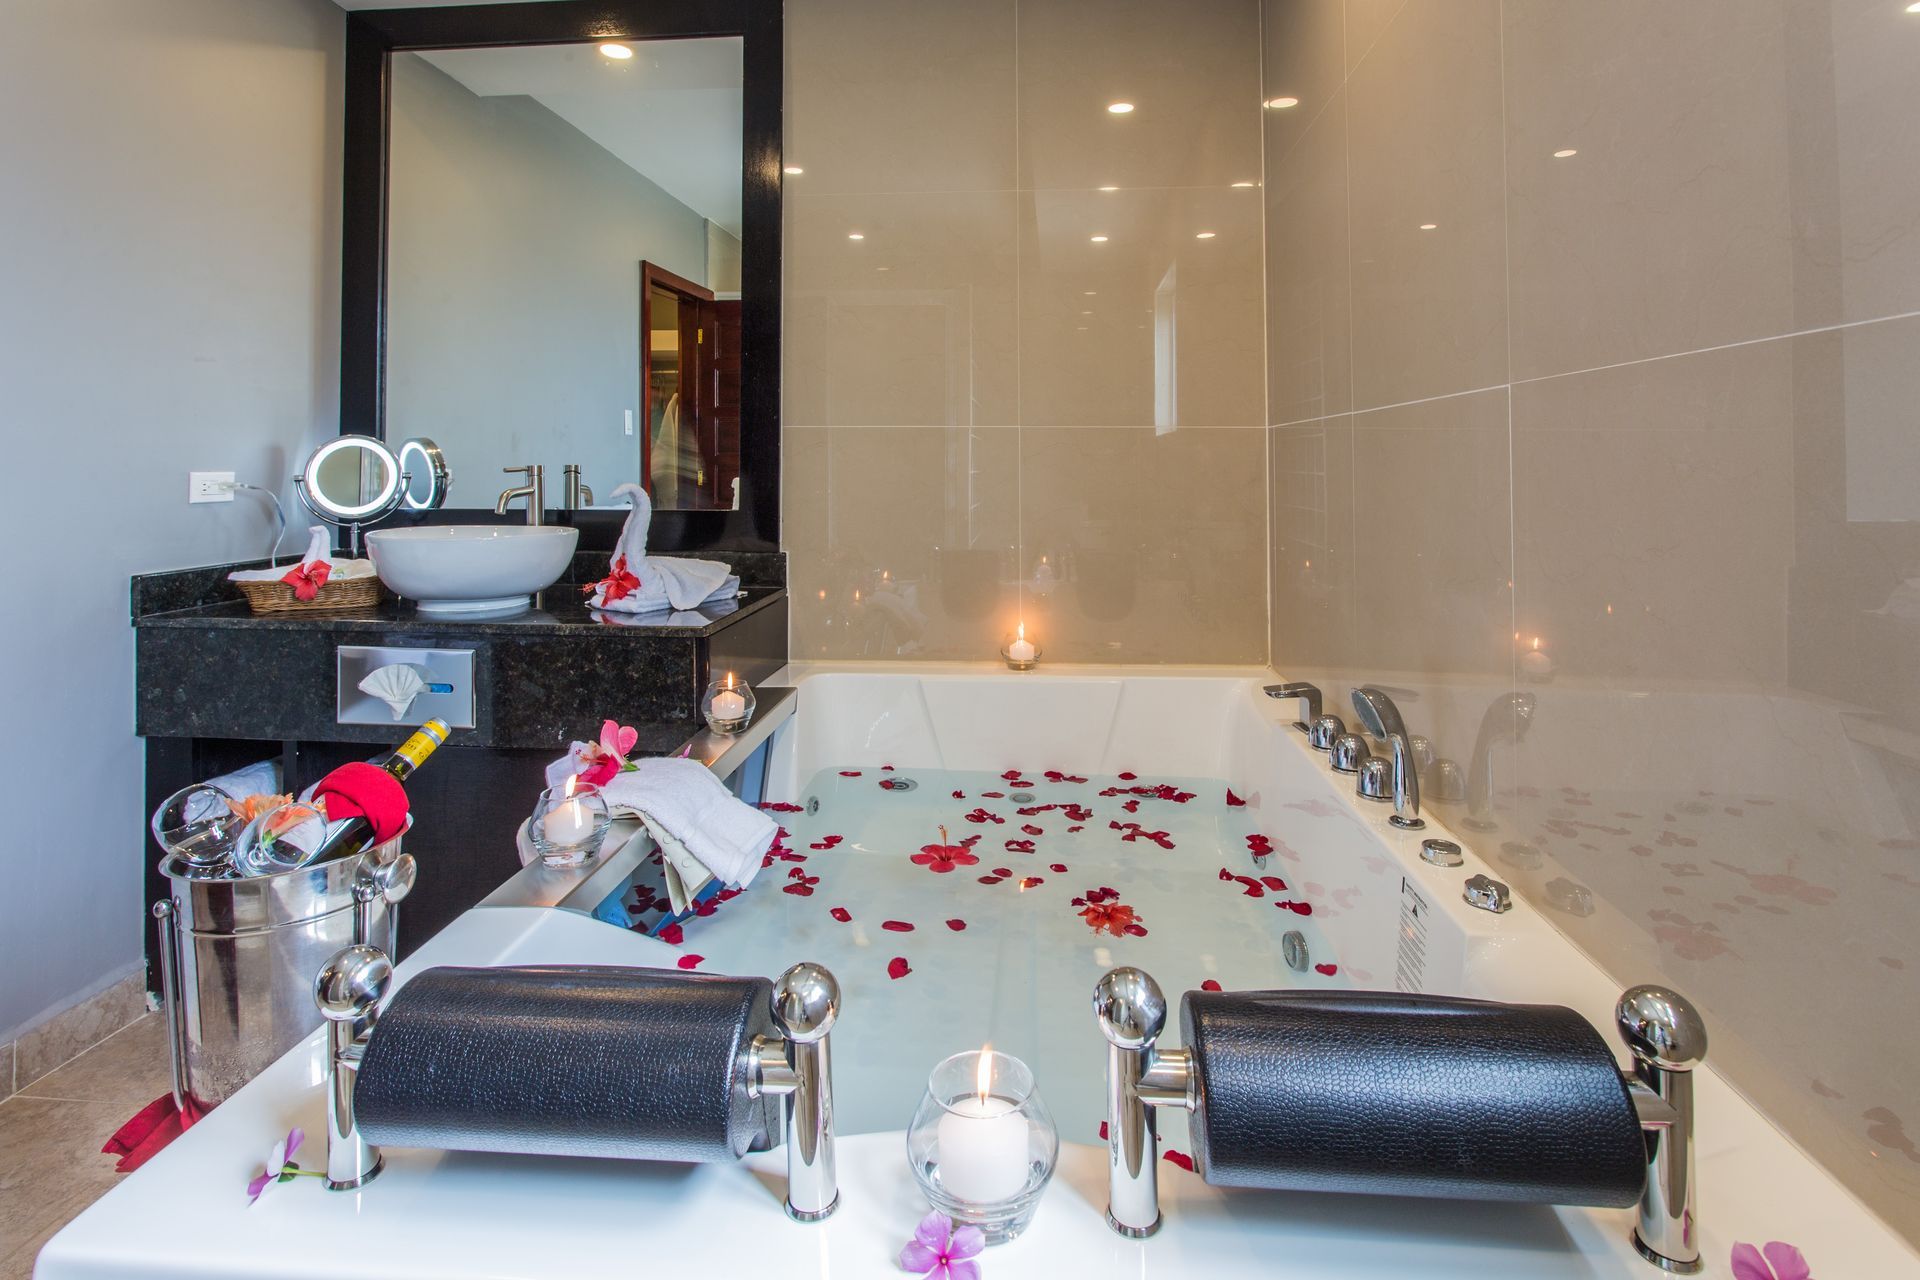 a bathroom with a large bathtub filled with water and rose petals .